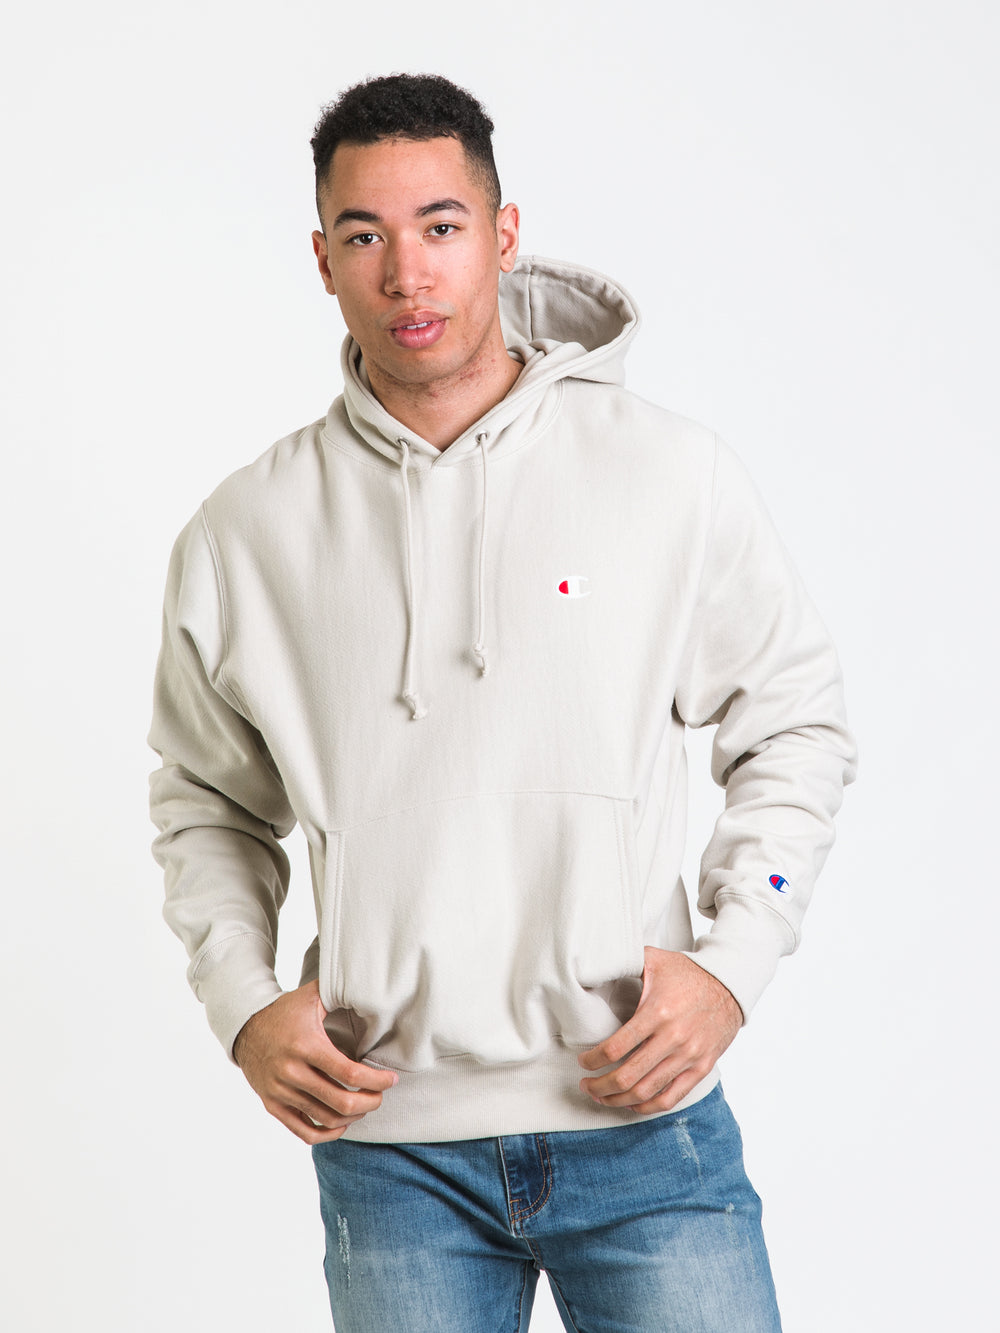 CHAMPION REVERSE WEAVE PULL OVER HOODIE